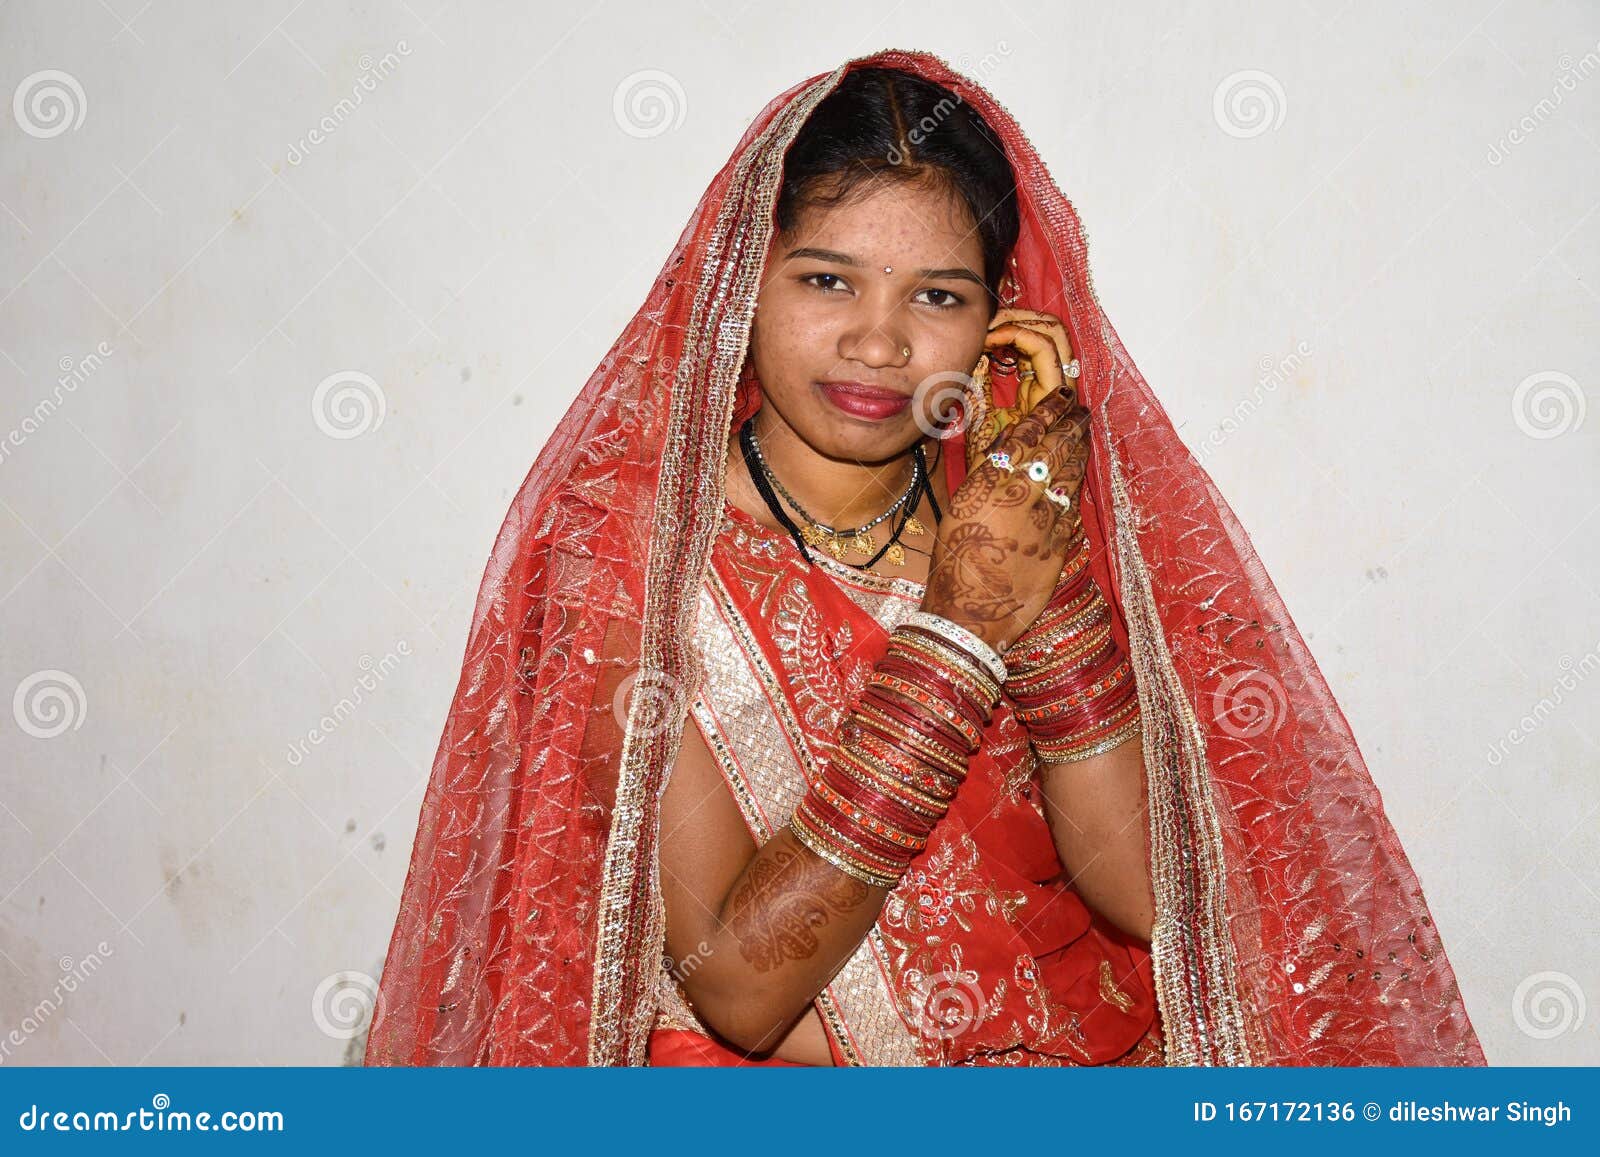 Wedding Photography Services at Rs 60000/day in Jaipur